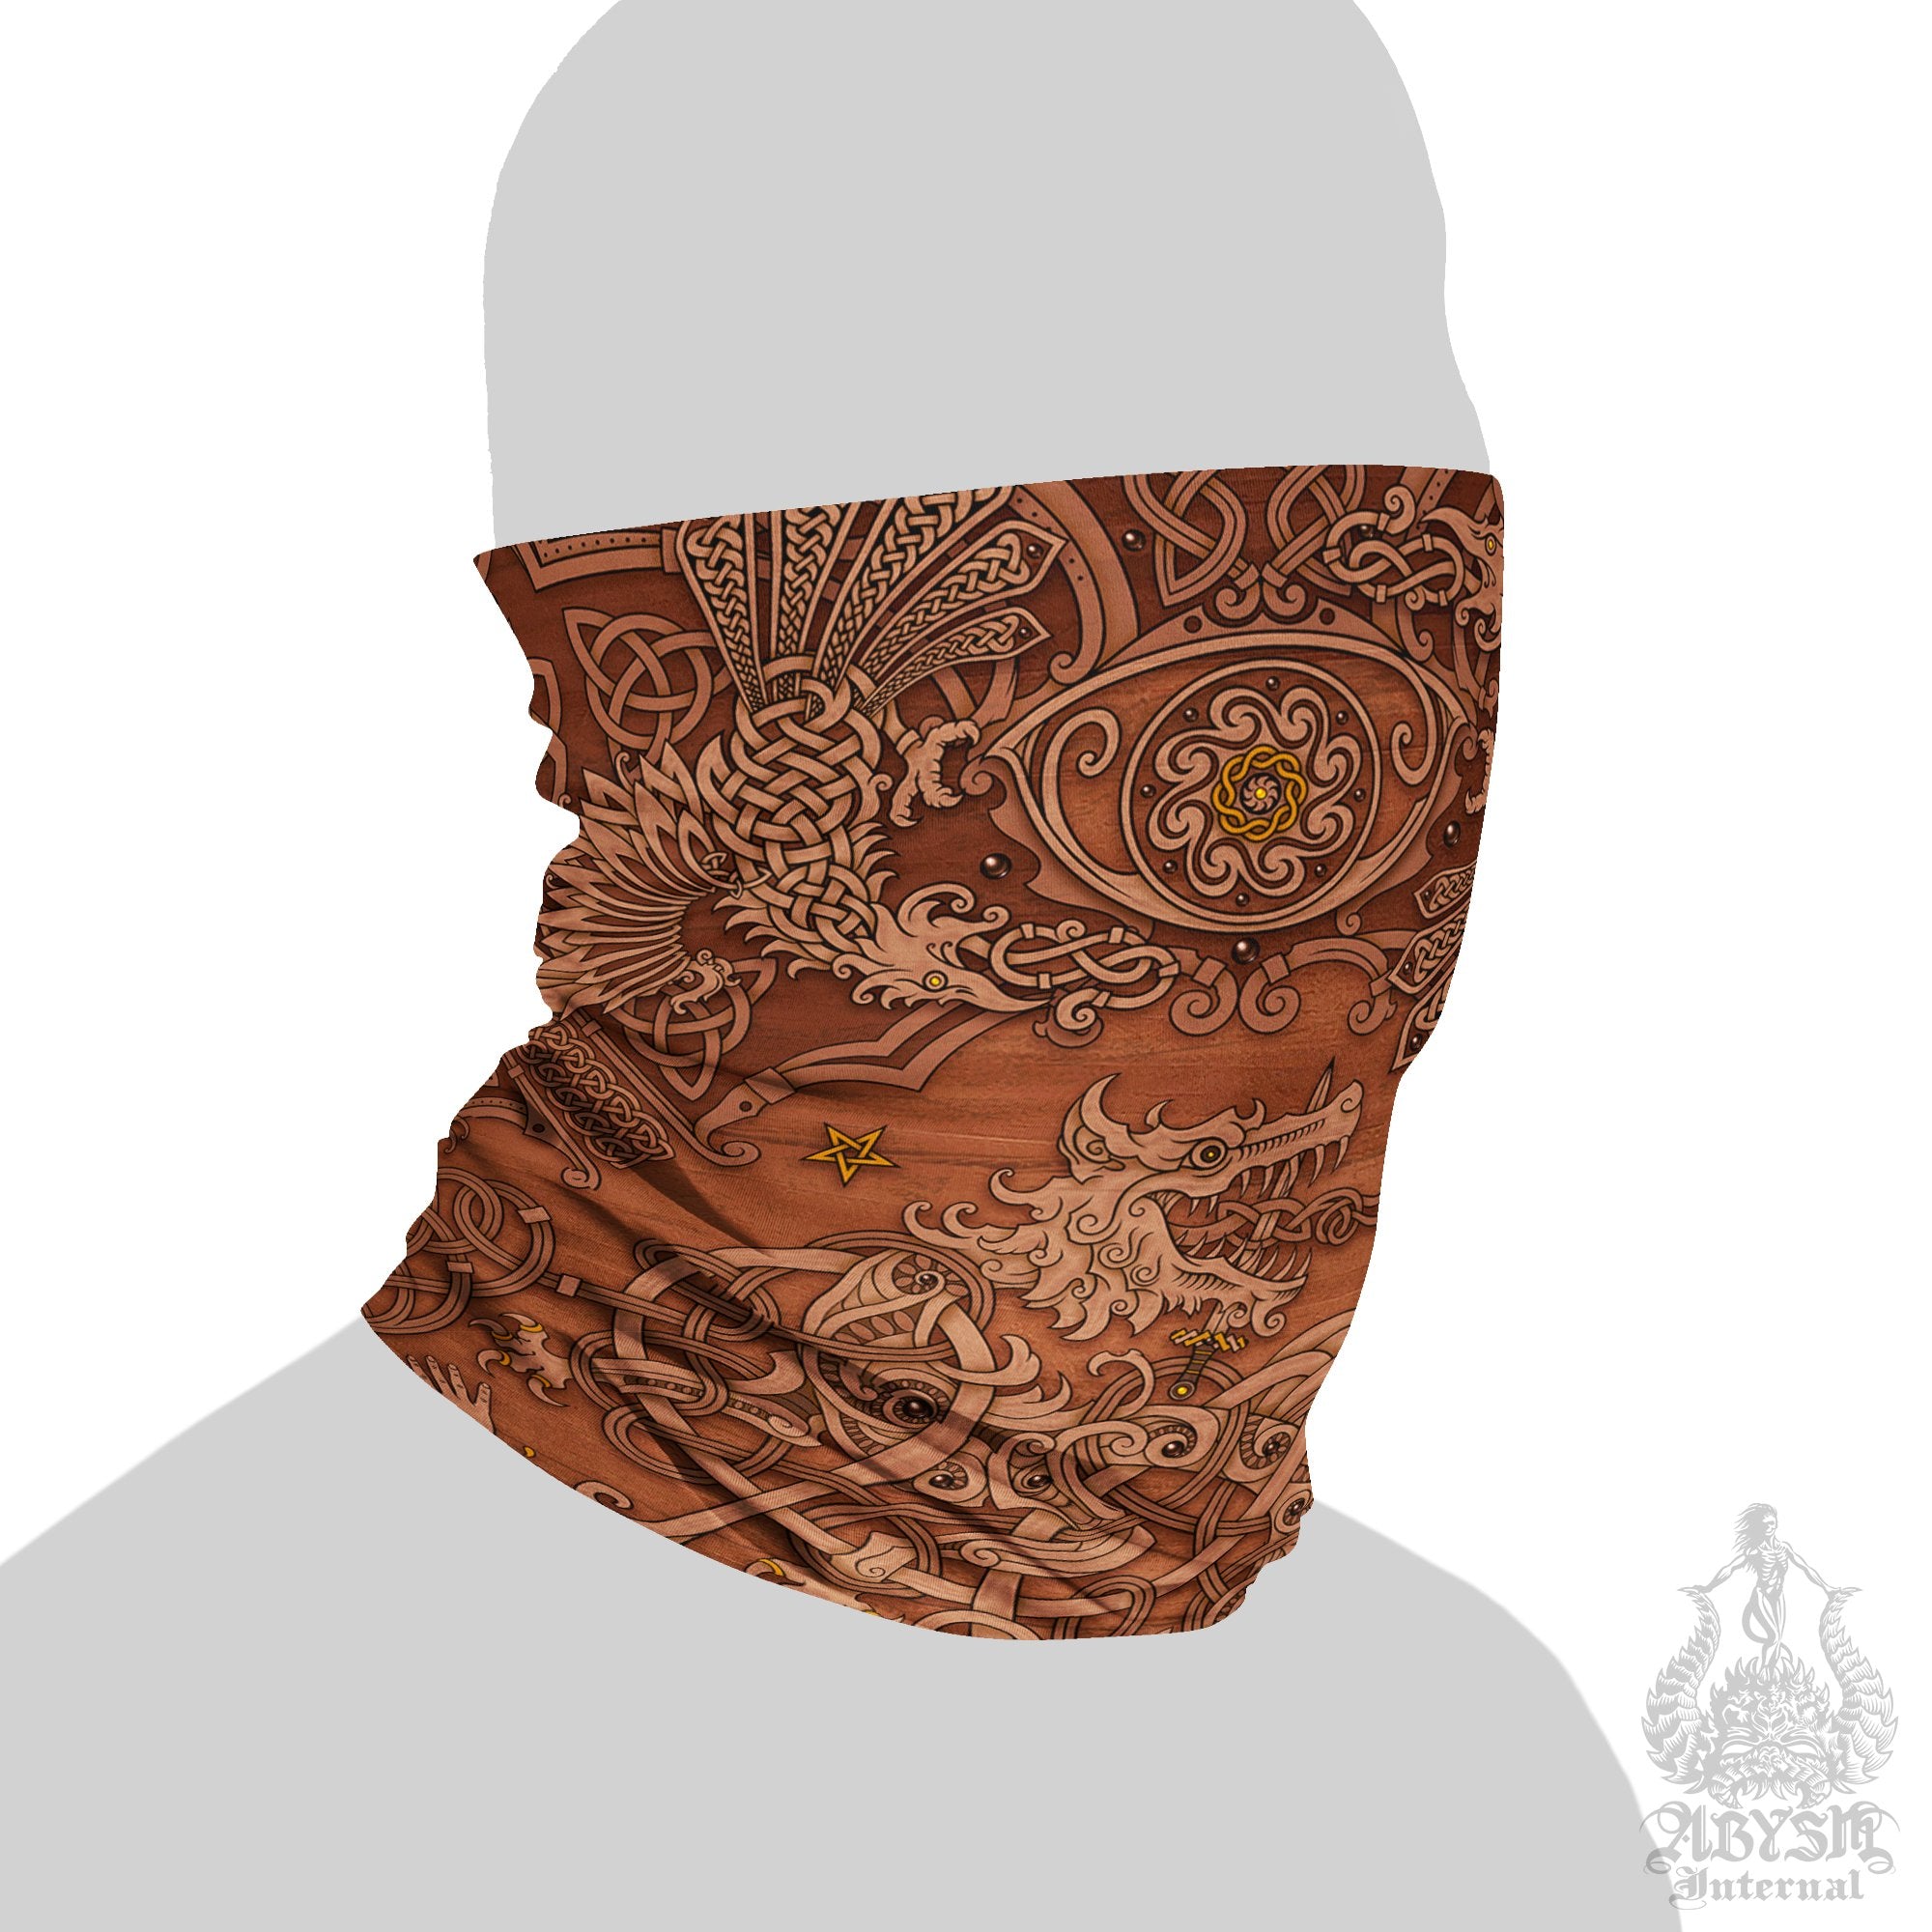 Nordic Art Neck Gaiter, Viking Face Mask, Fenrir Printed Head Covering, Norse Wolf - Wood - Abysm Internal